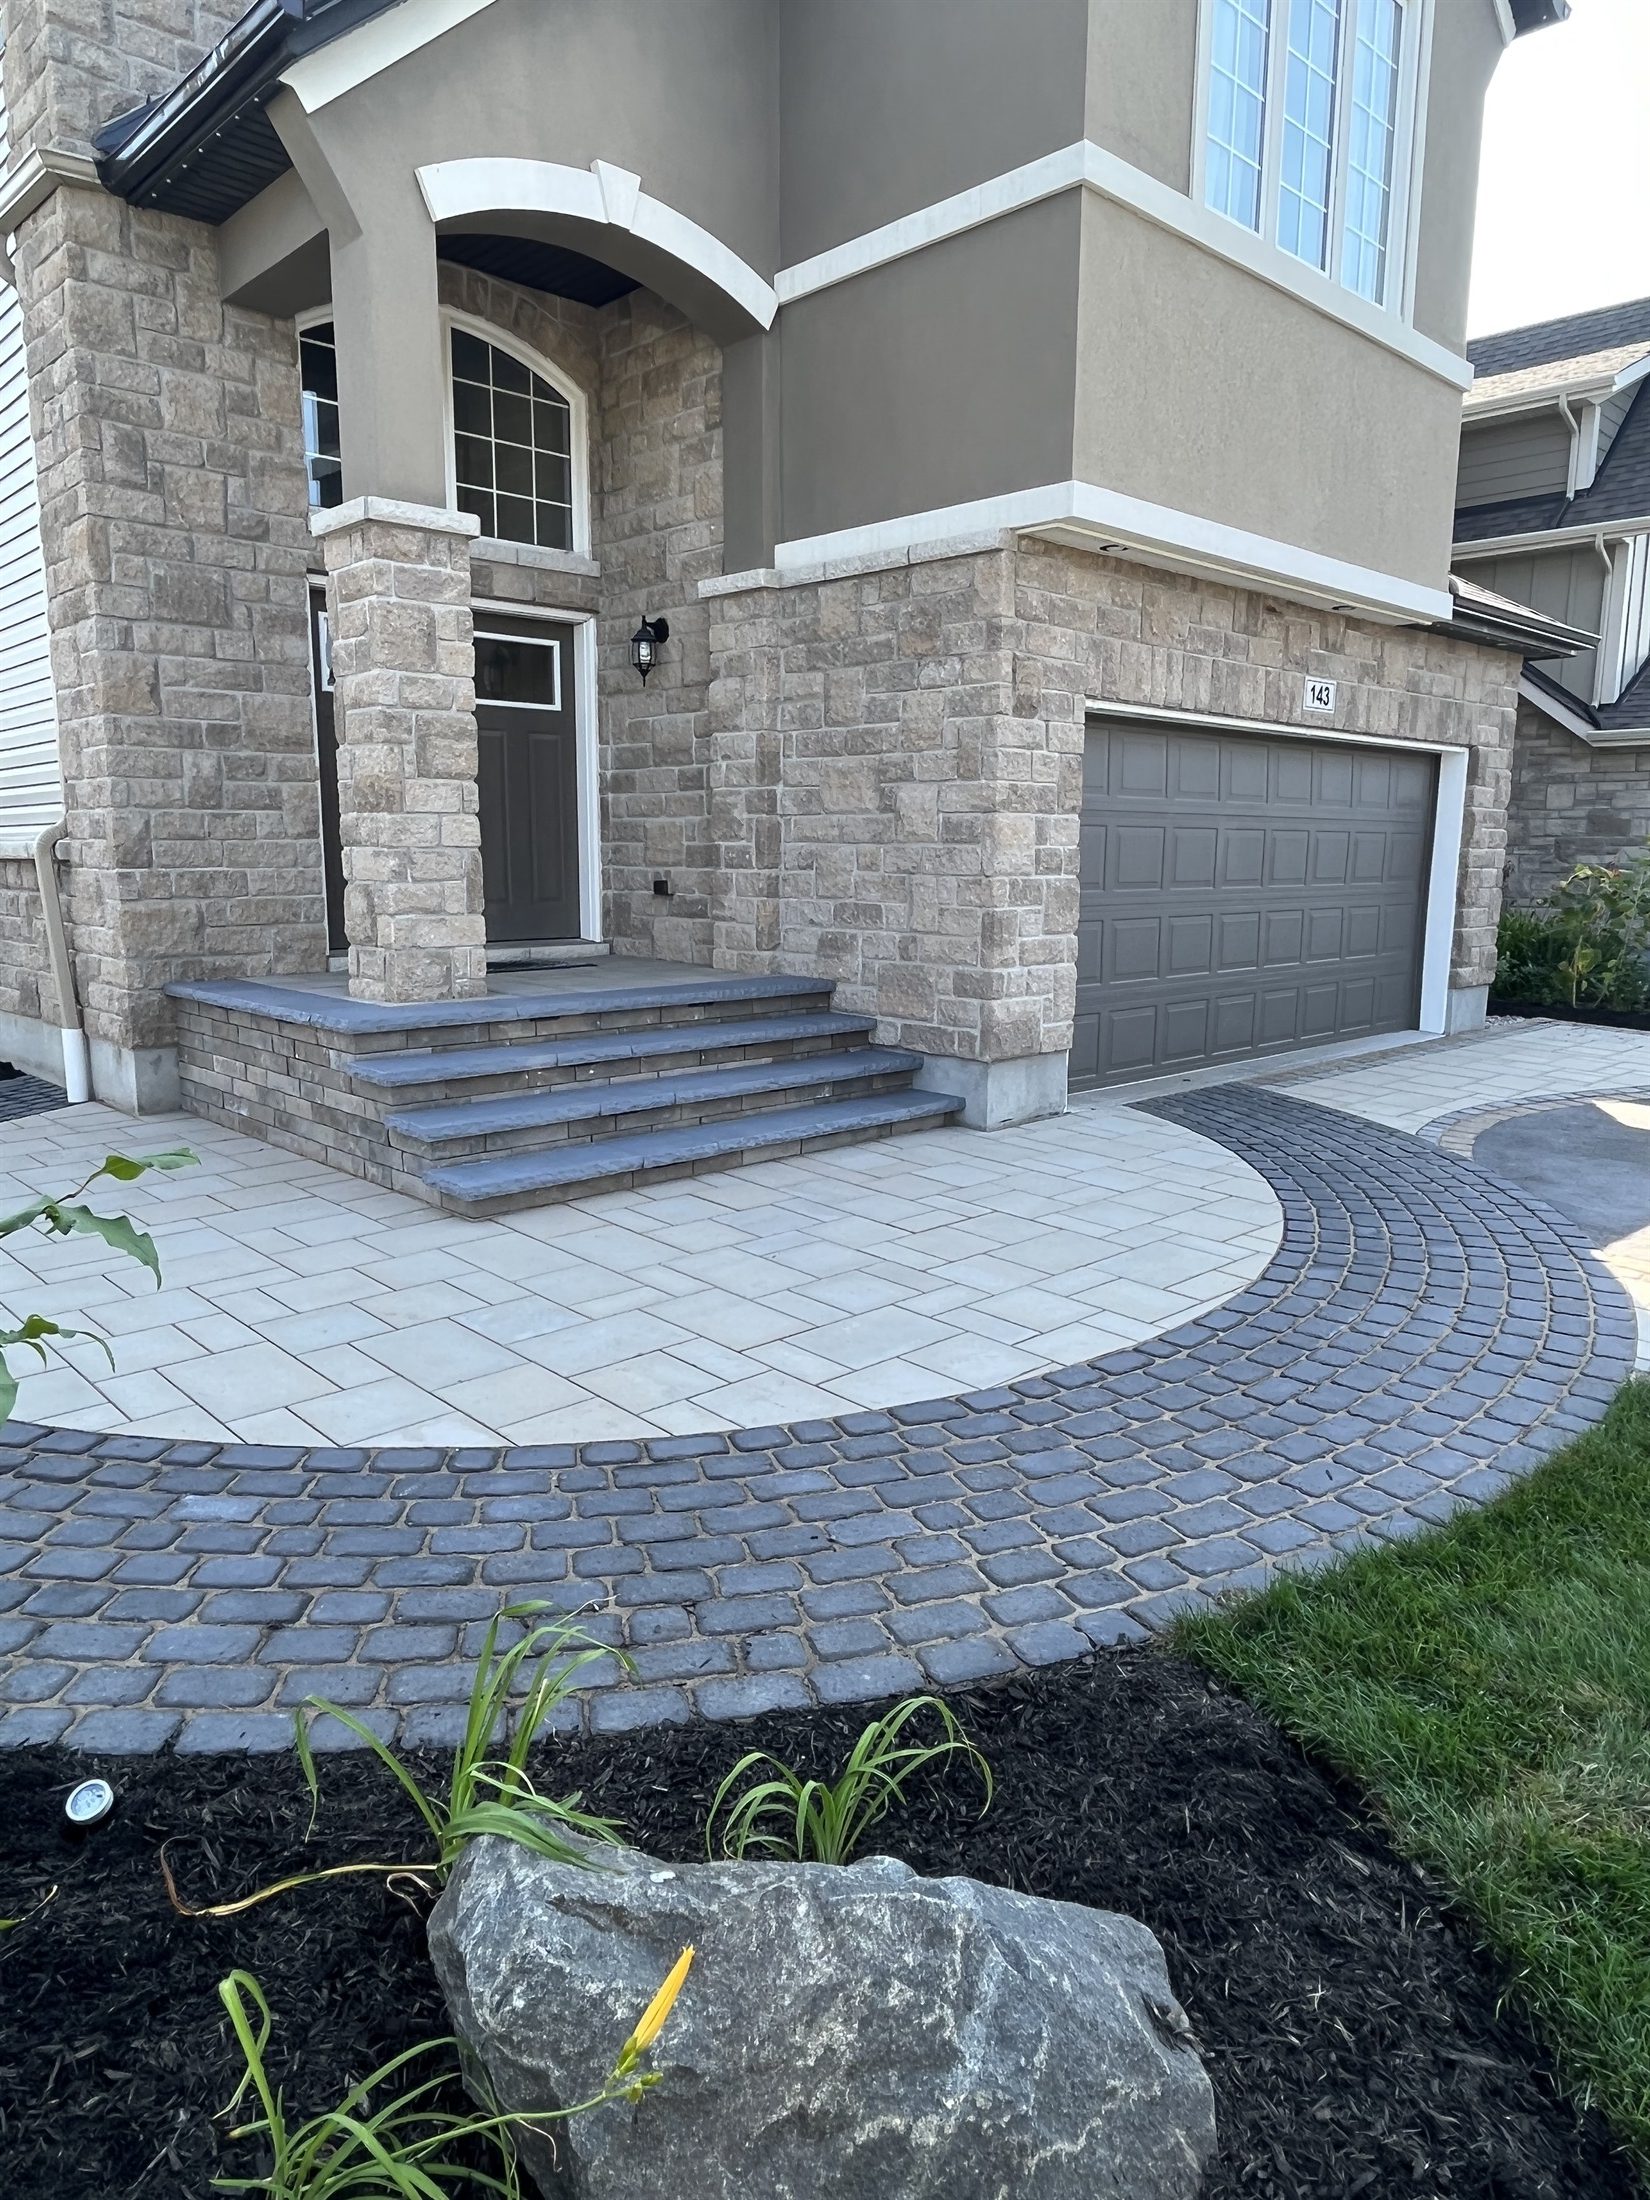 Interlock walkway and driveway with black and natural coloured stones.